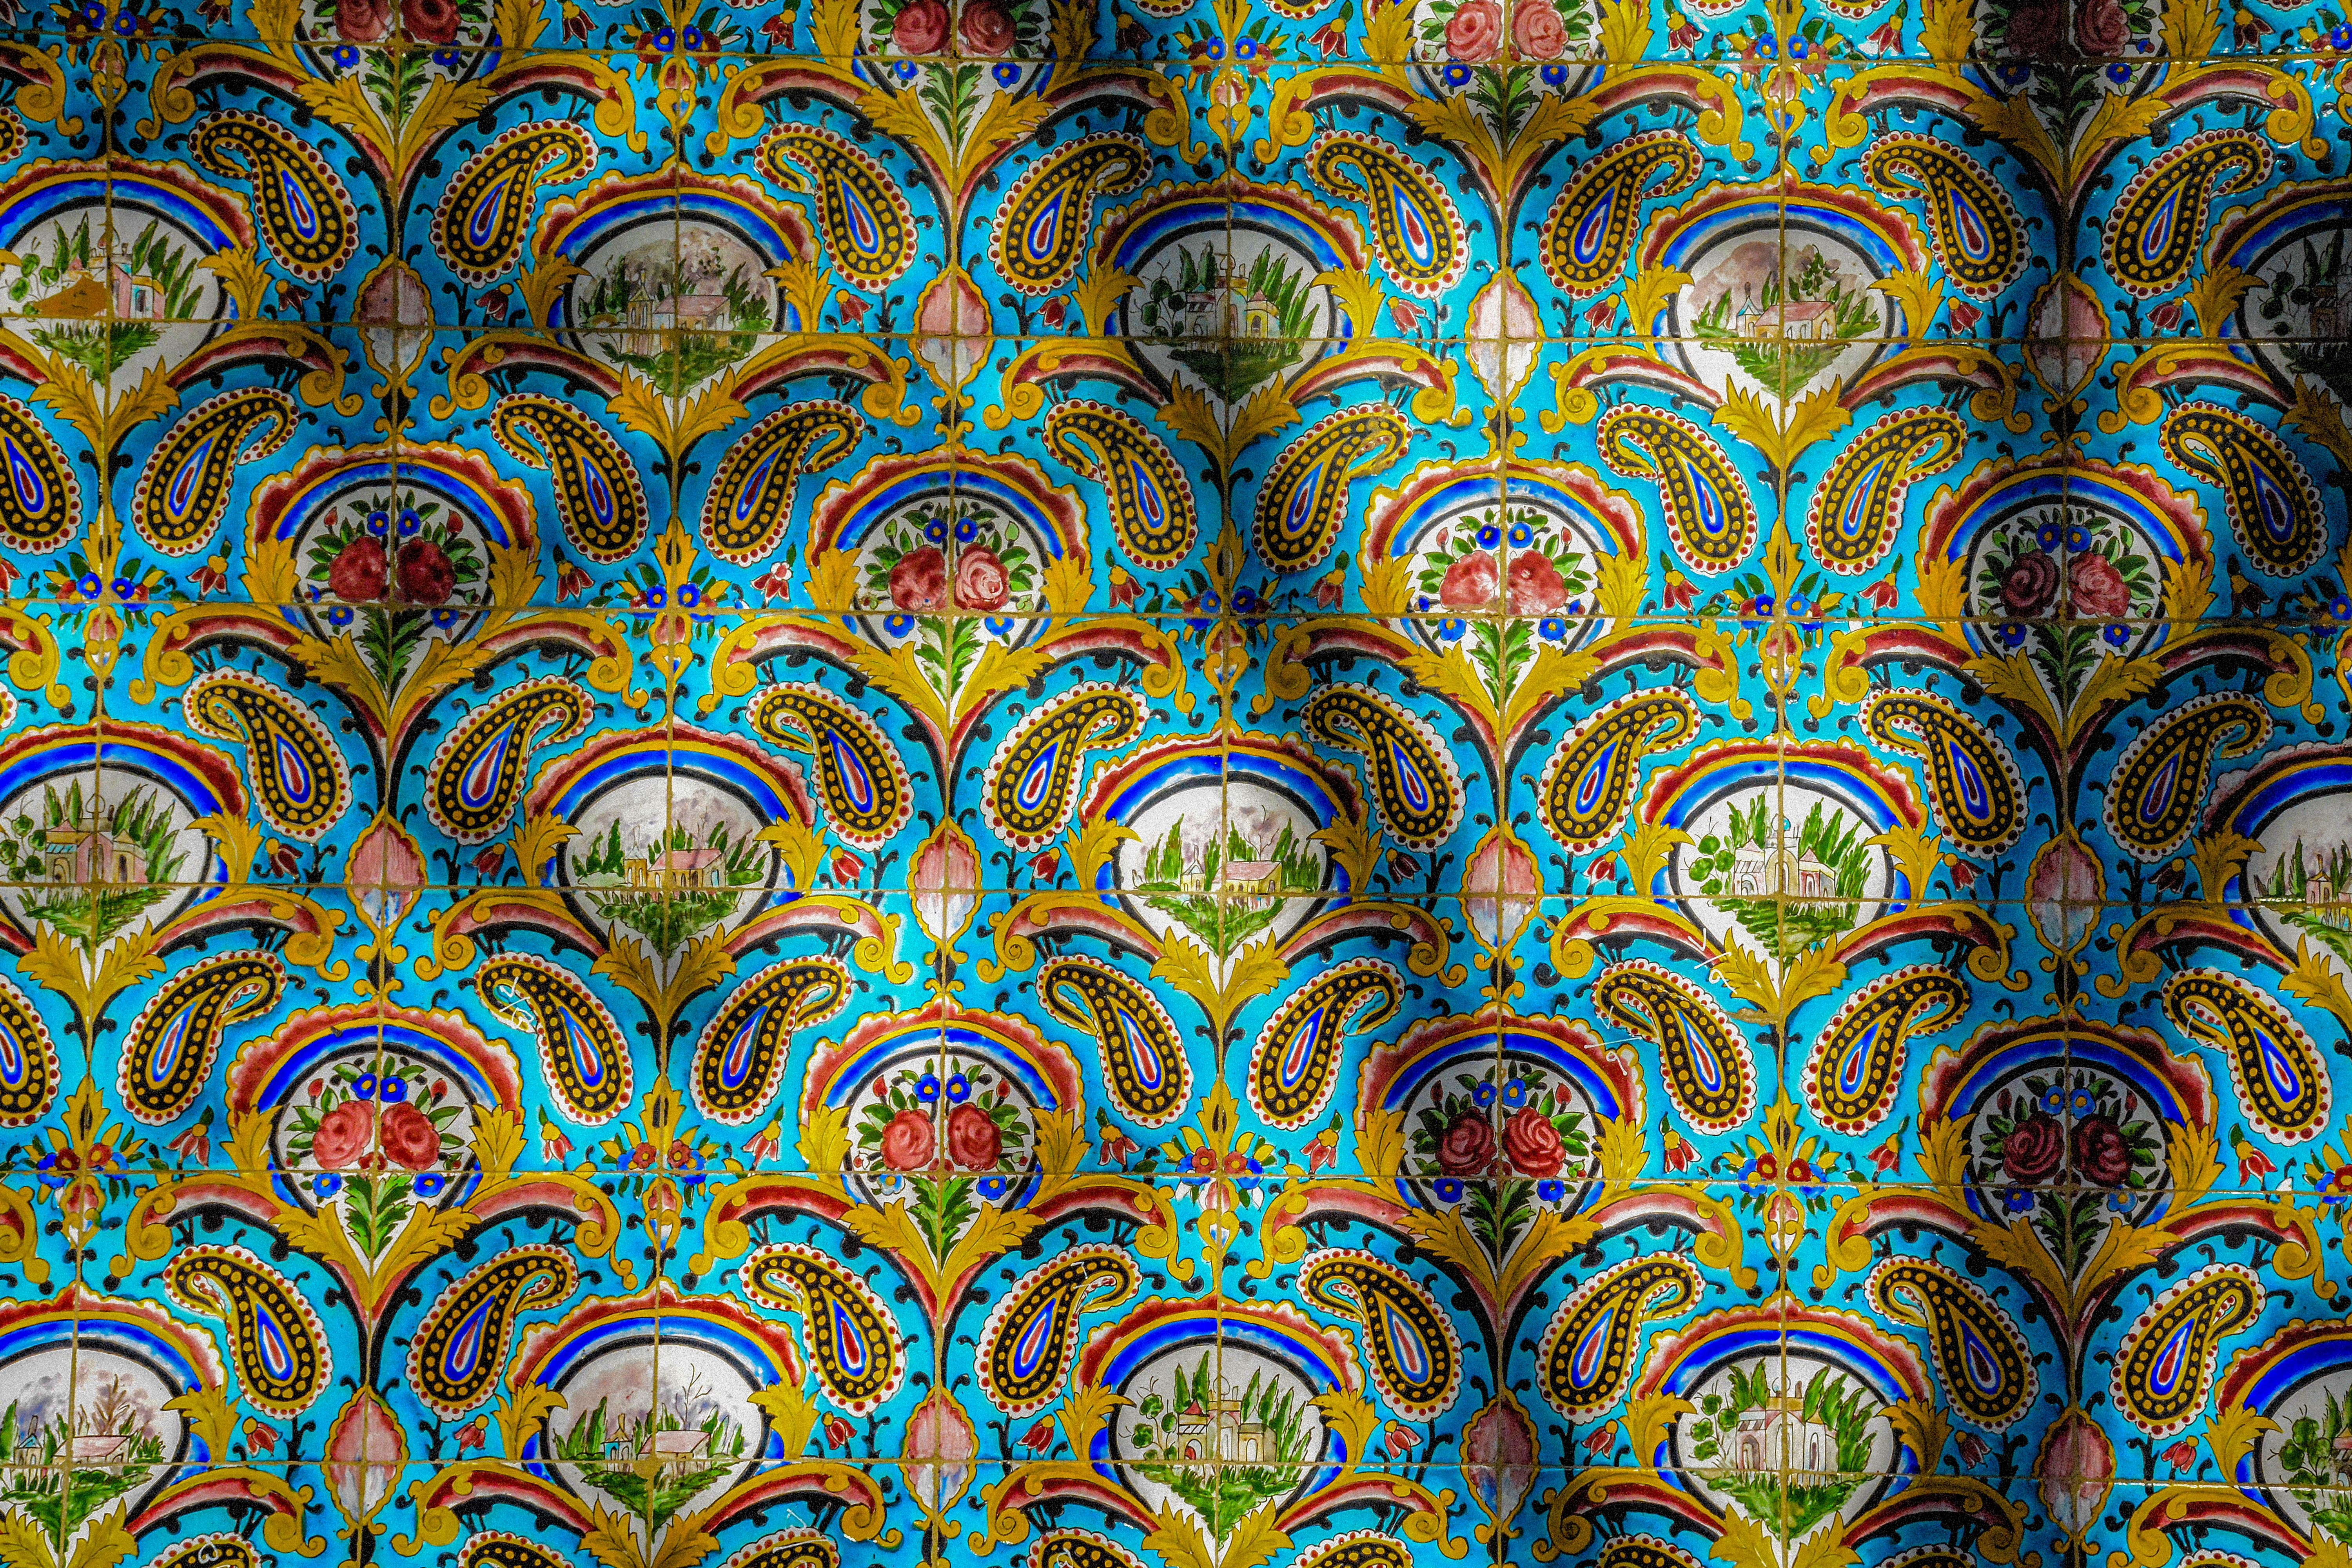 Details of paintings done on mosaic tiles, Golestan Palace – © Hamed Mirzahosseini / Shutterstock